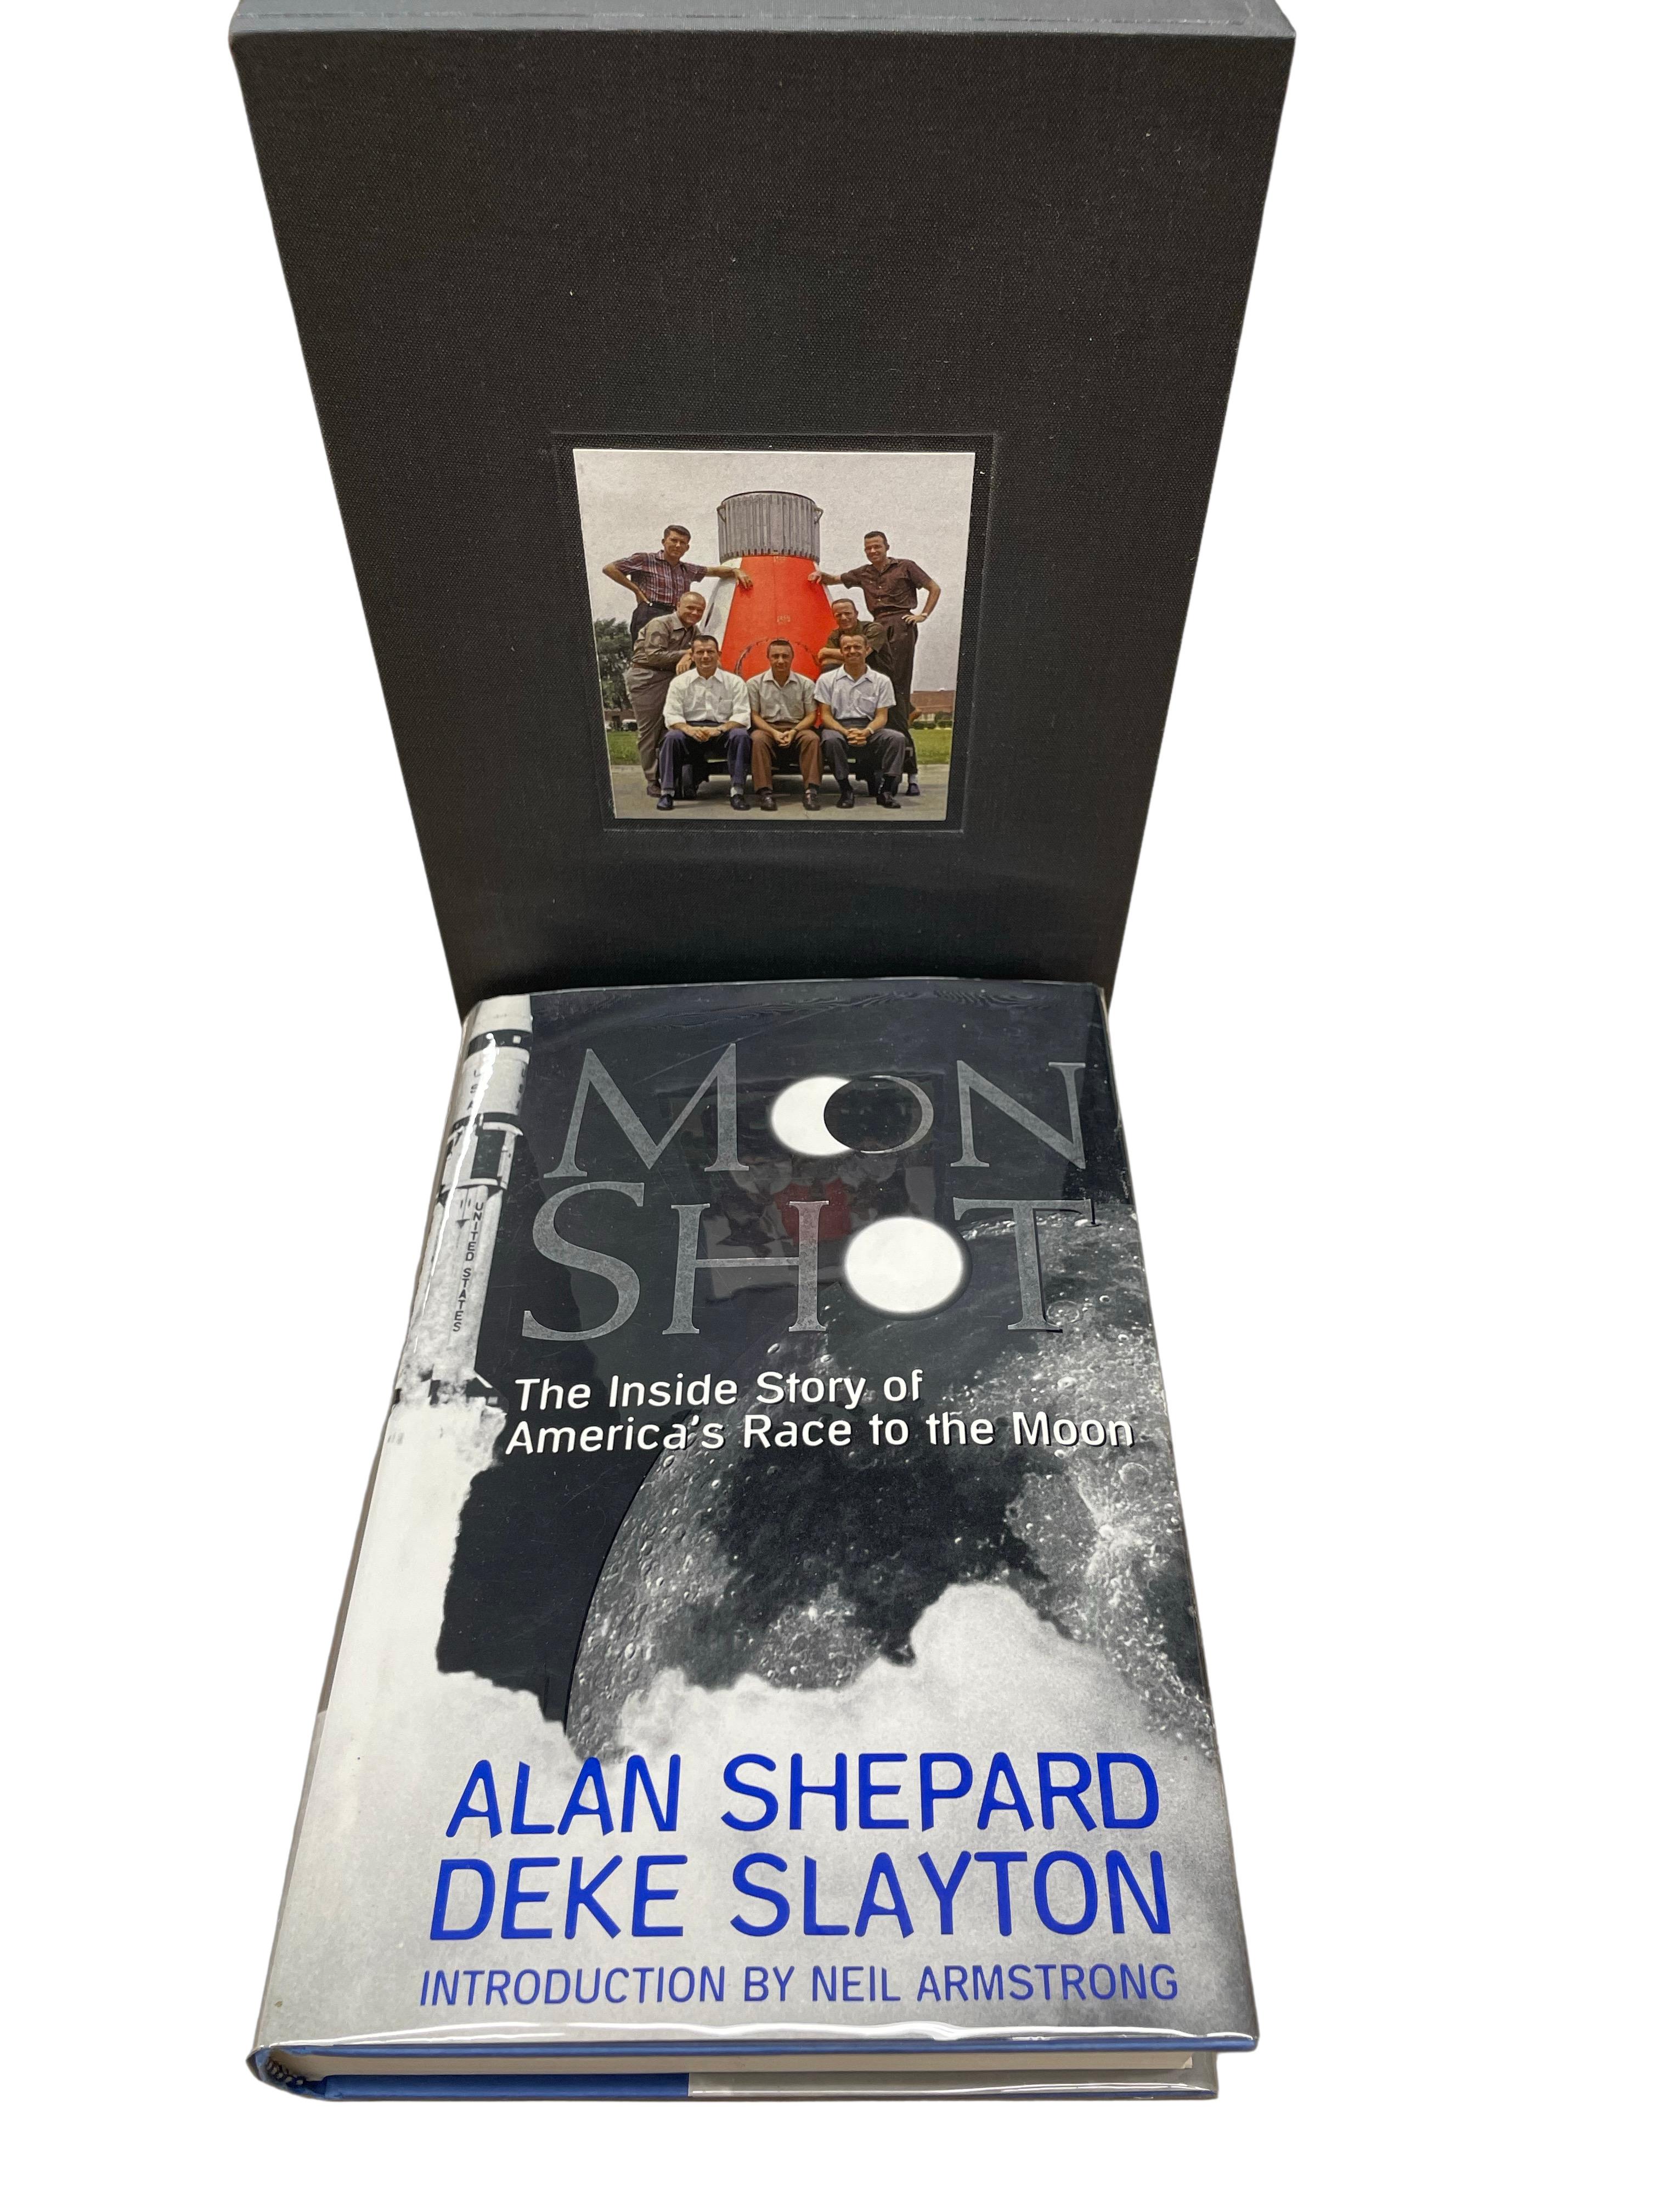 Shepard, Alan, Slayton, Deke, Moon Shot: The Inside Story of America's Race to the Moon. Atlanta: Turner Publishing, 1994. First Edition, Signed and inscribed by Alan Shepard on the full title page. Introduction by Neil Armstrong. Original blue